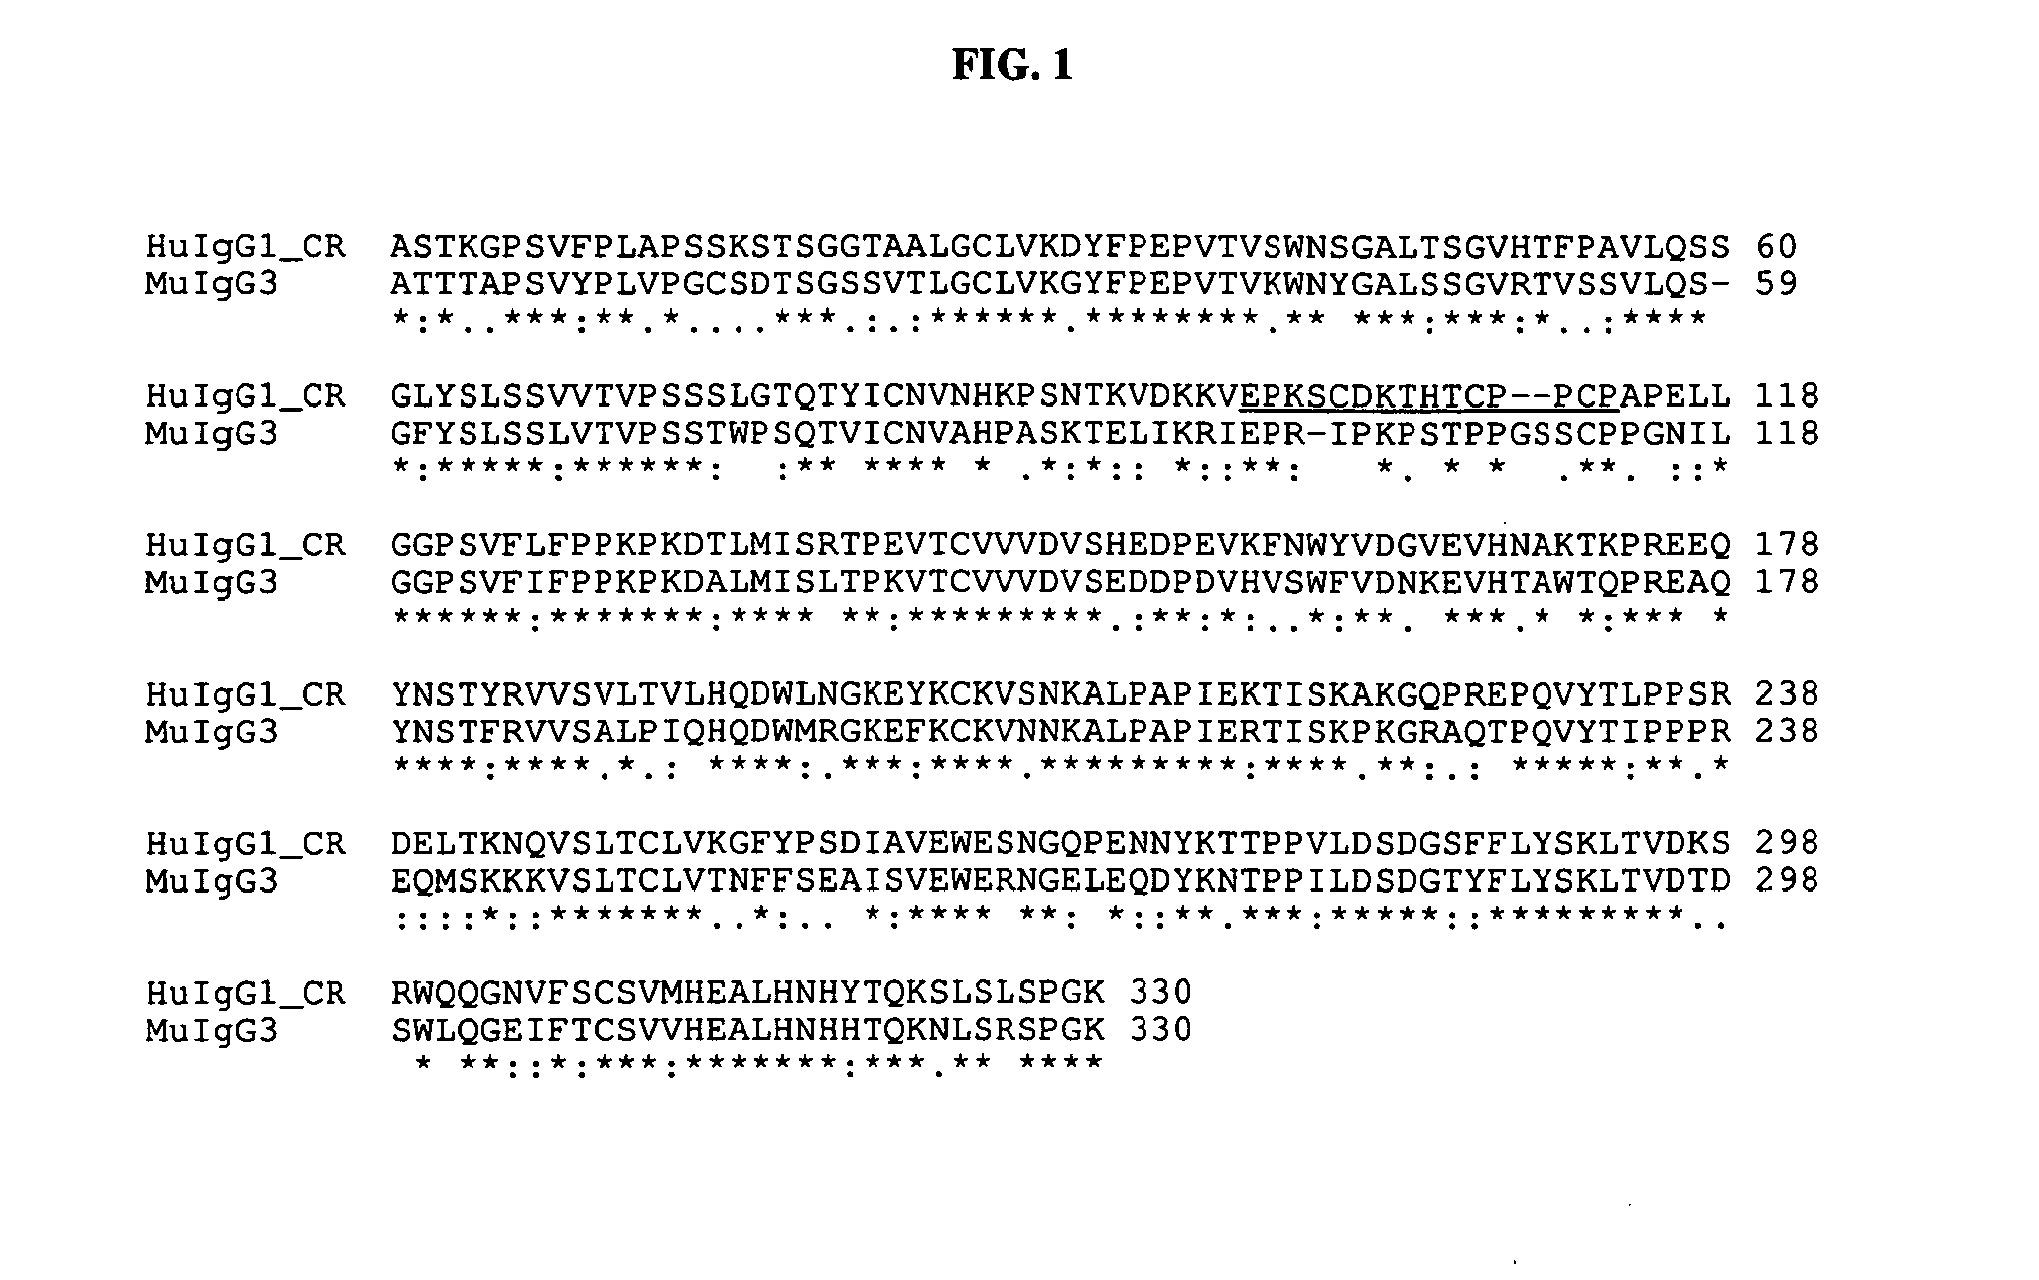 Antibodies recognizing a carbohydrate containing epitope on cd-43 and cea expressed on cancer cells and methods using same